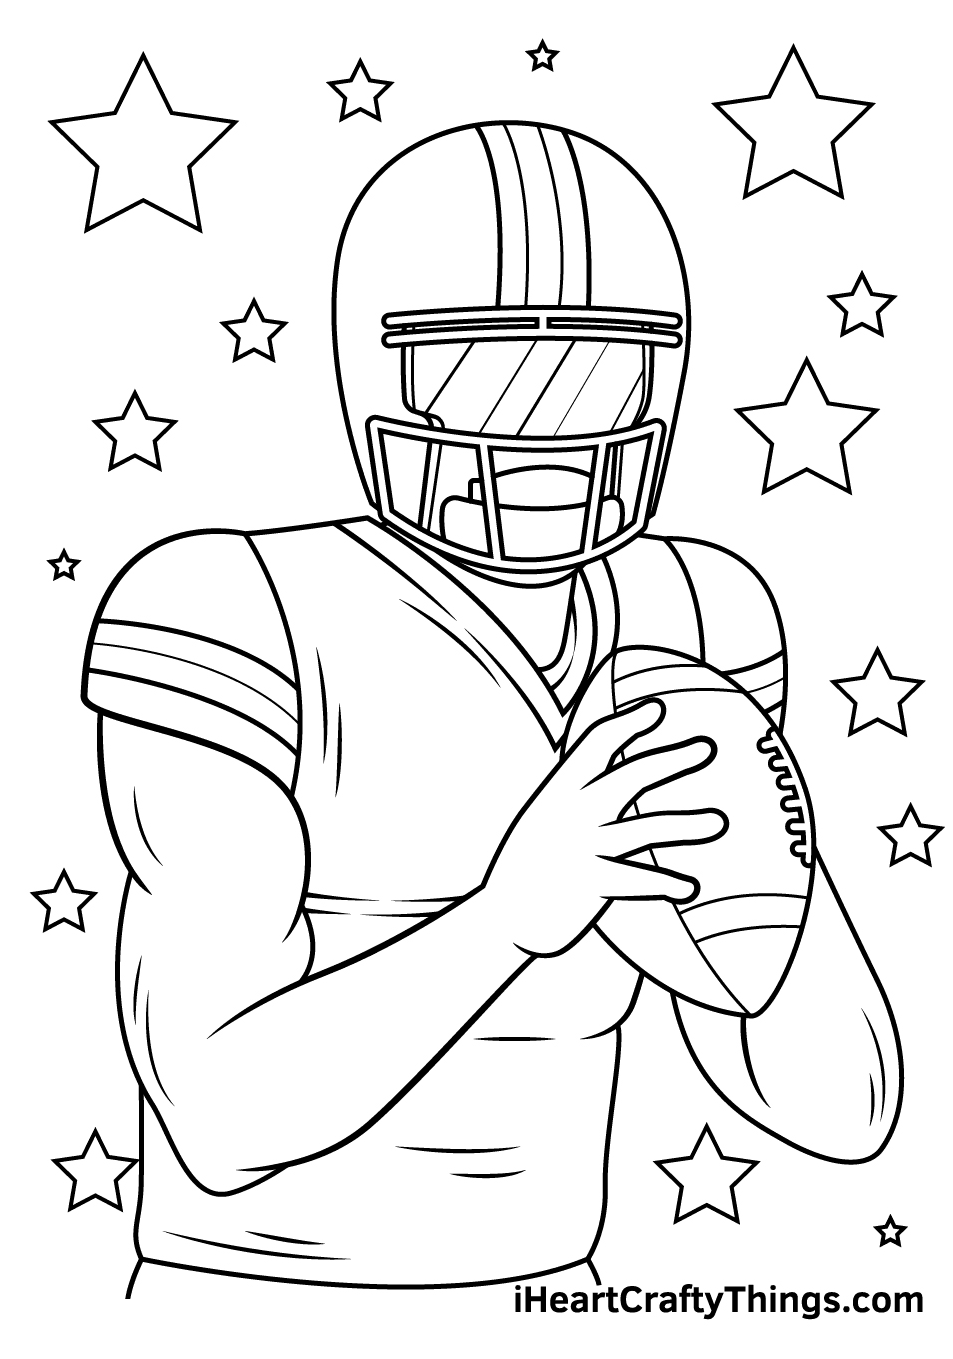 A Football Player holding the Ball